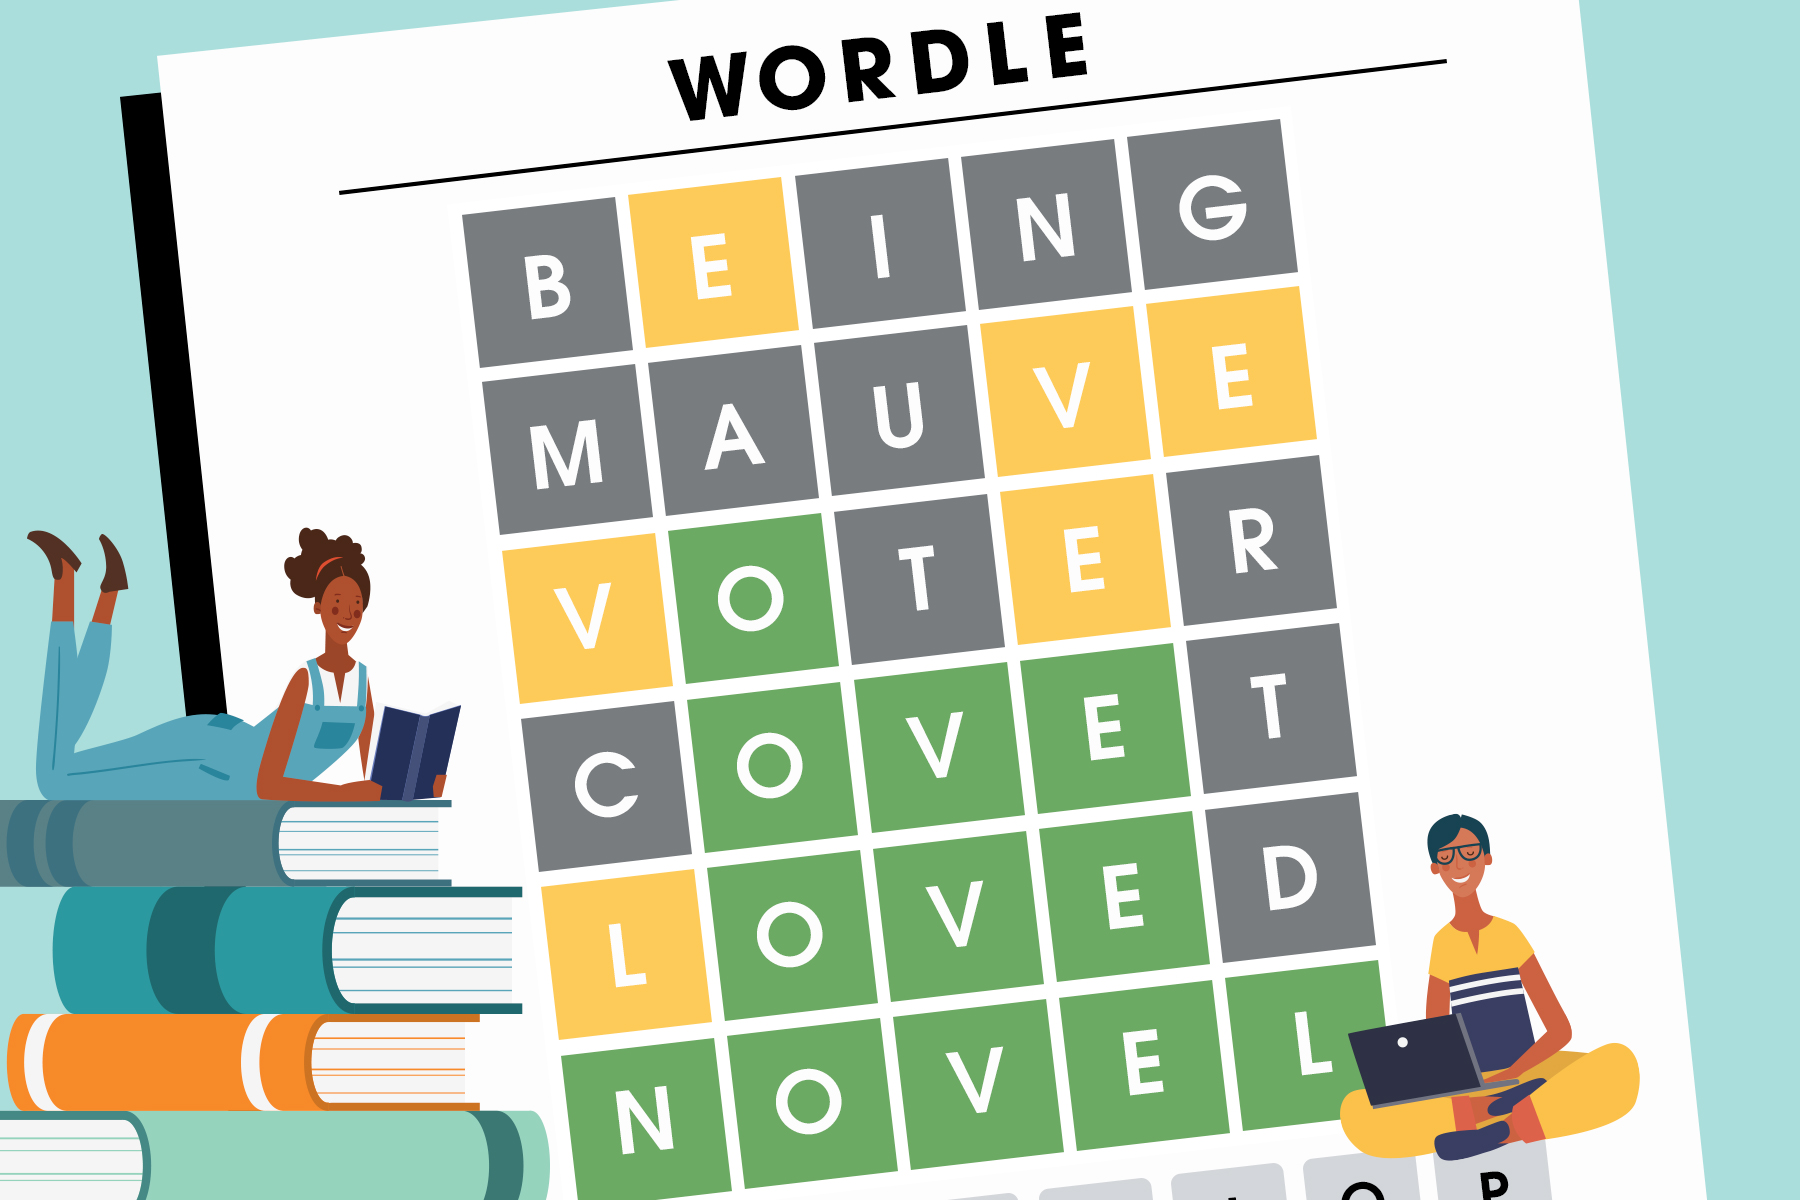 A completed wordle puzzle spelling 'novel' 